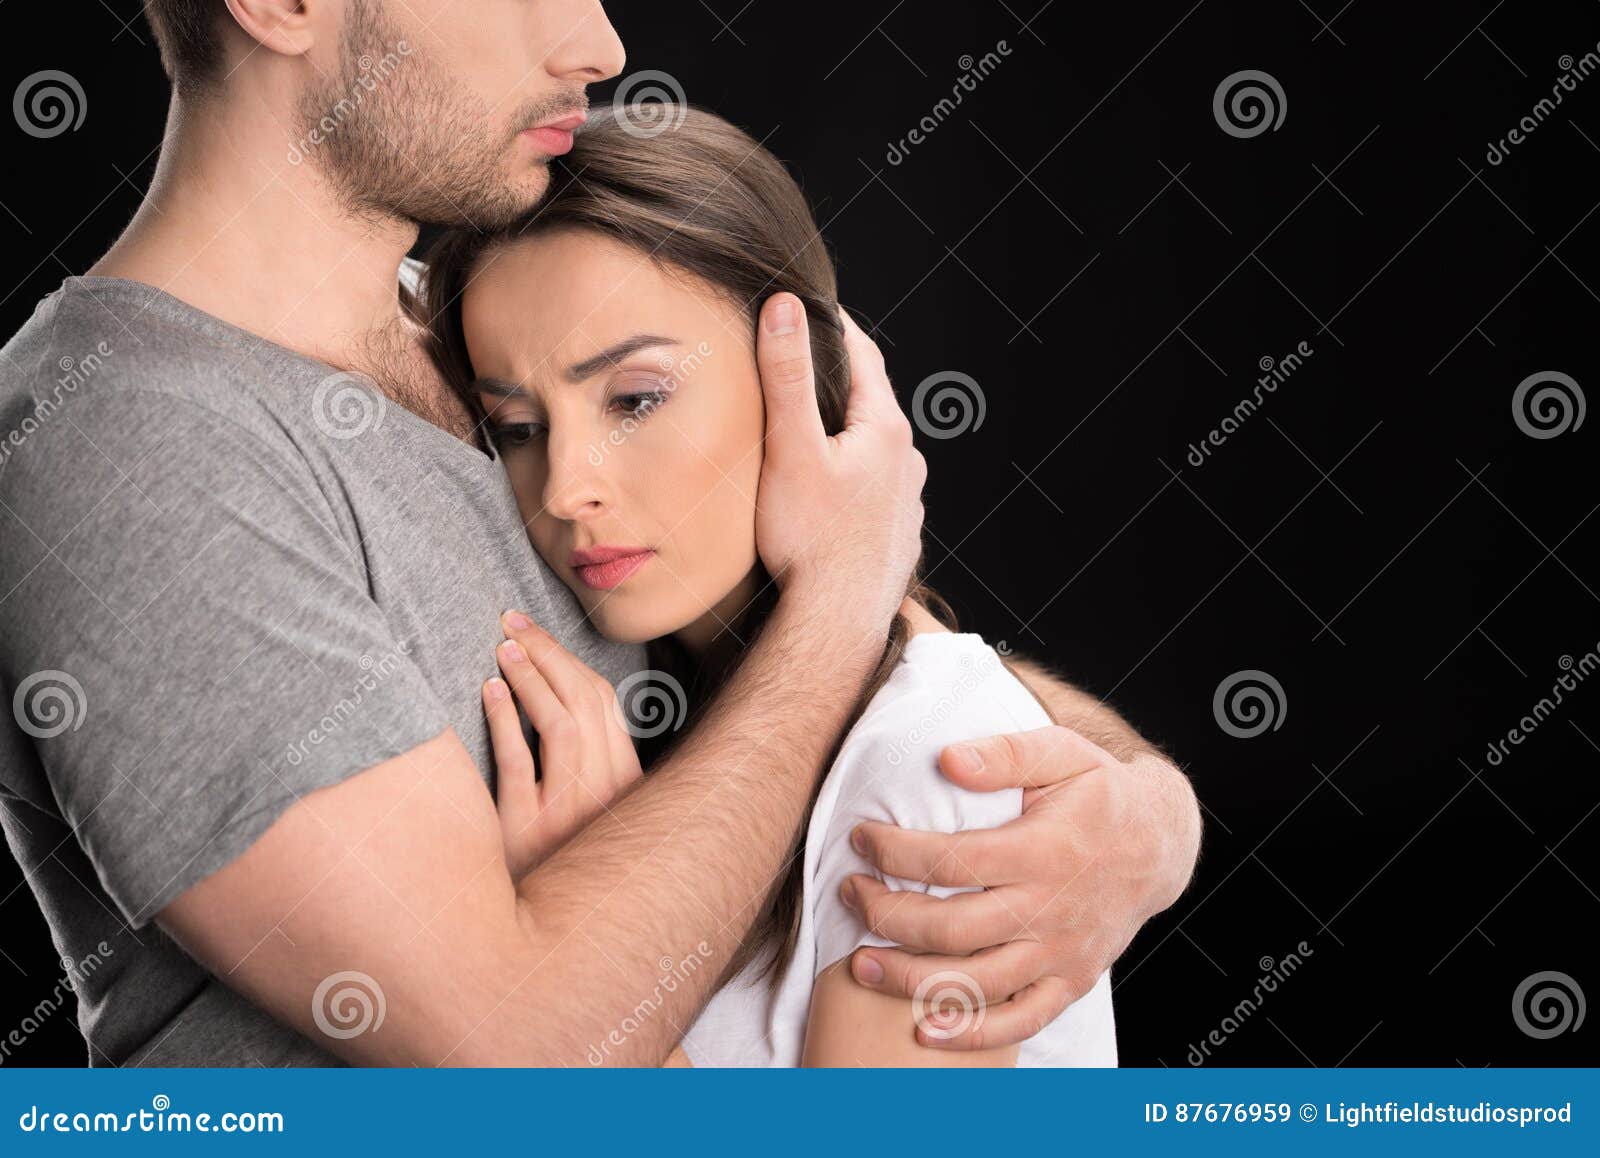 Portrait Of Man Hugging Upset Woman Stock Image Image Of Cropped 